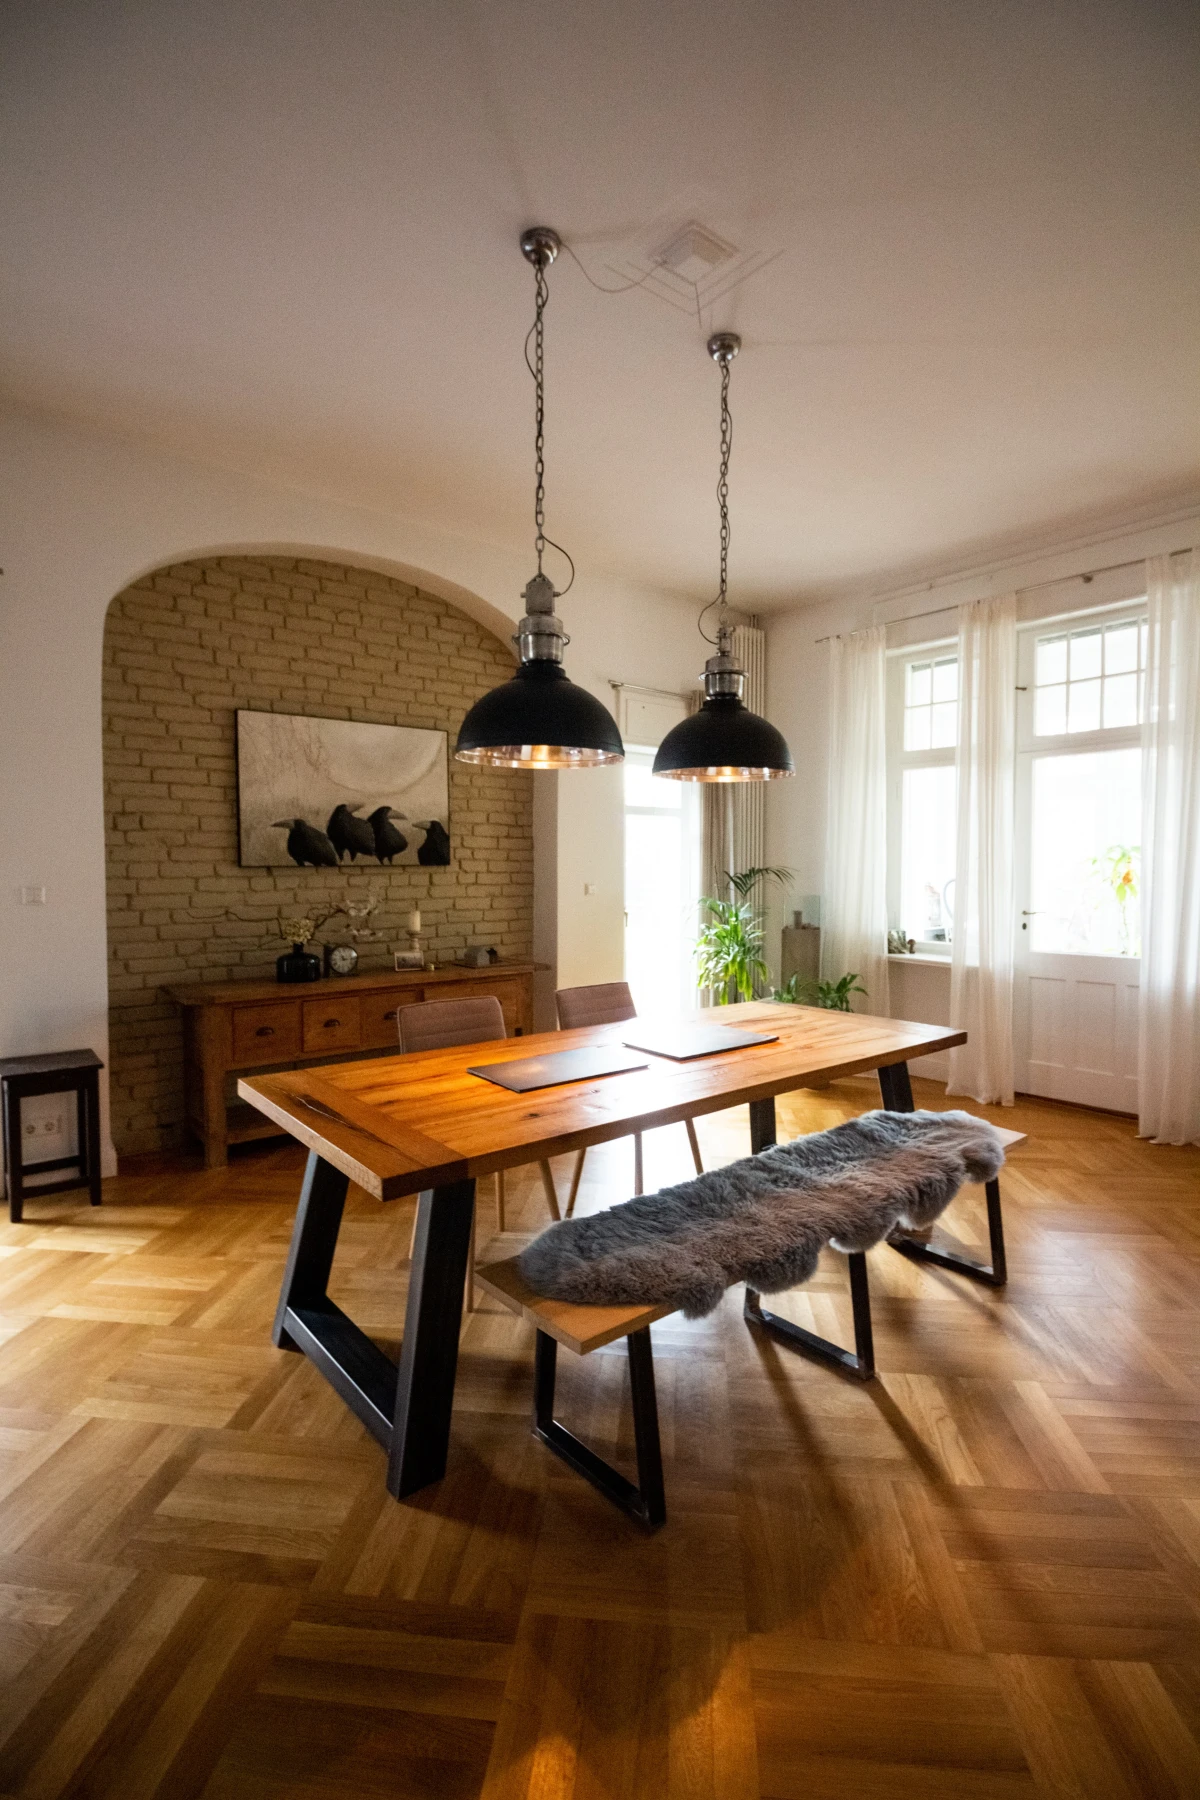 wooden flooring in dining table